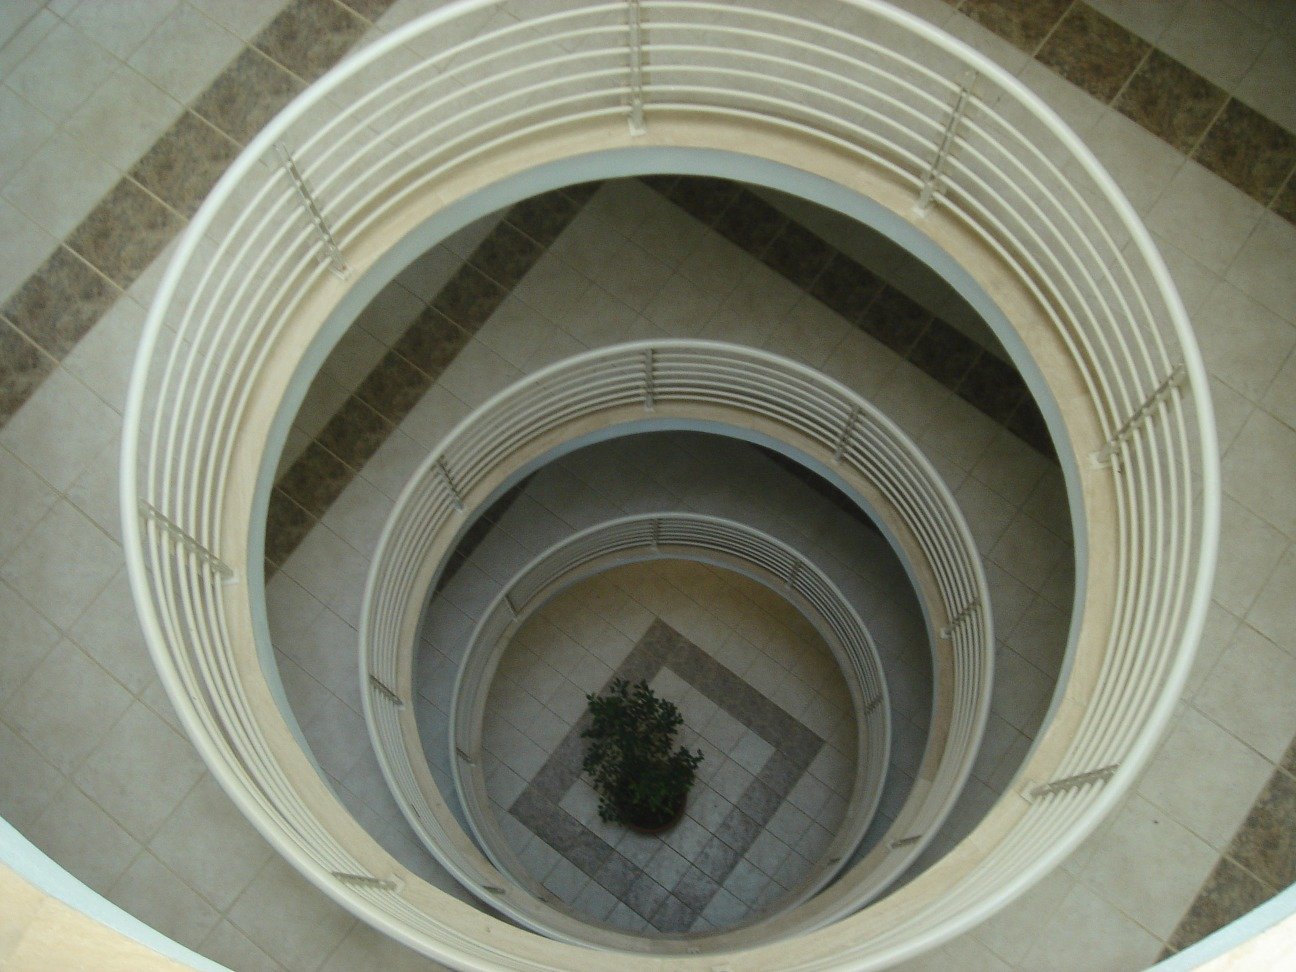 an overhead view of the ceiling and the round window